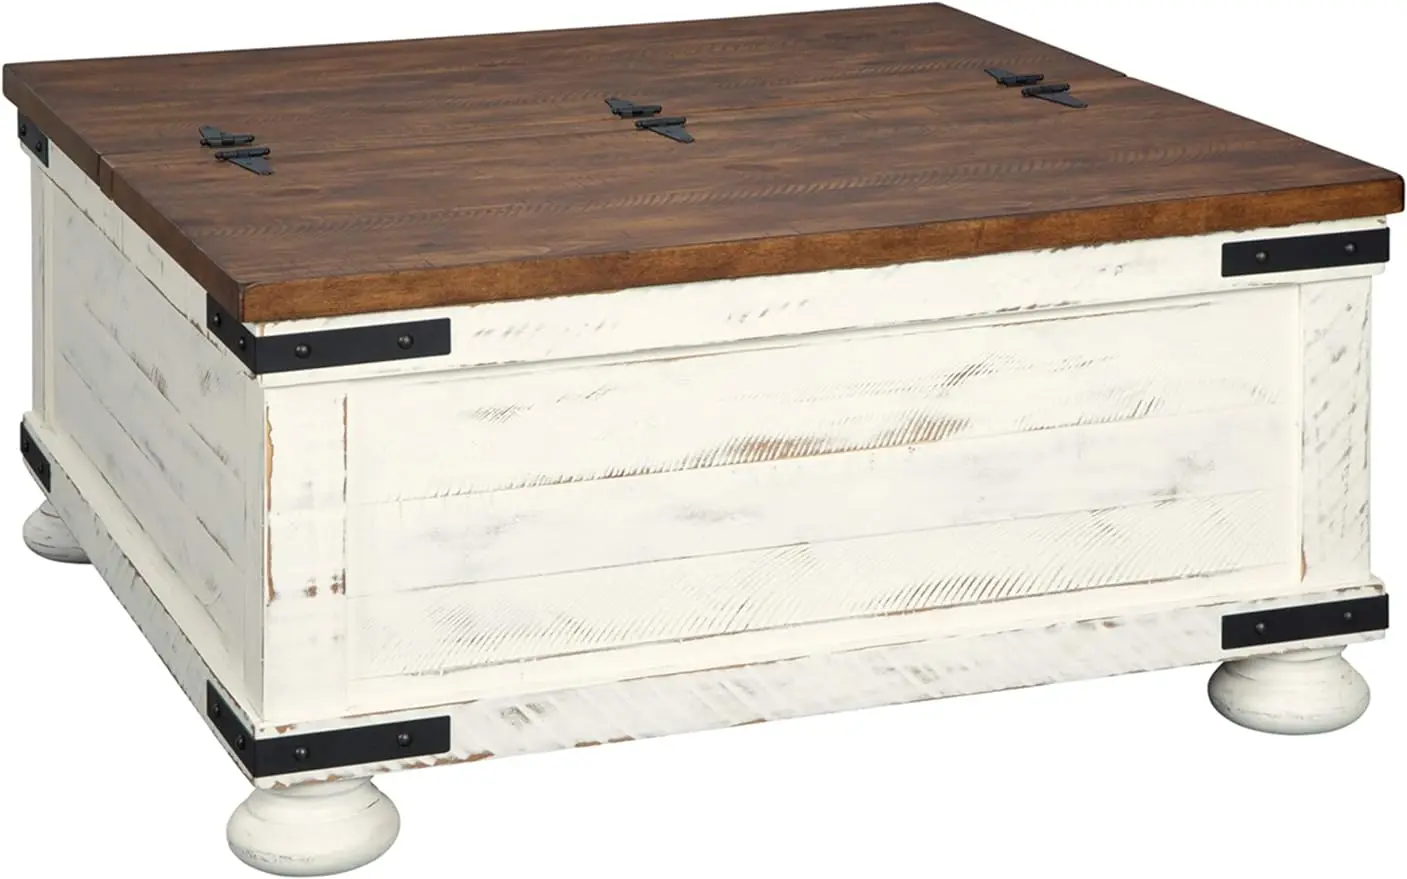 

Signature Design by Ashley Wystfield Farmhouse Square Storage Coffee Table with Hinged Lift Top, Distressed White